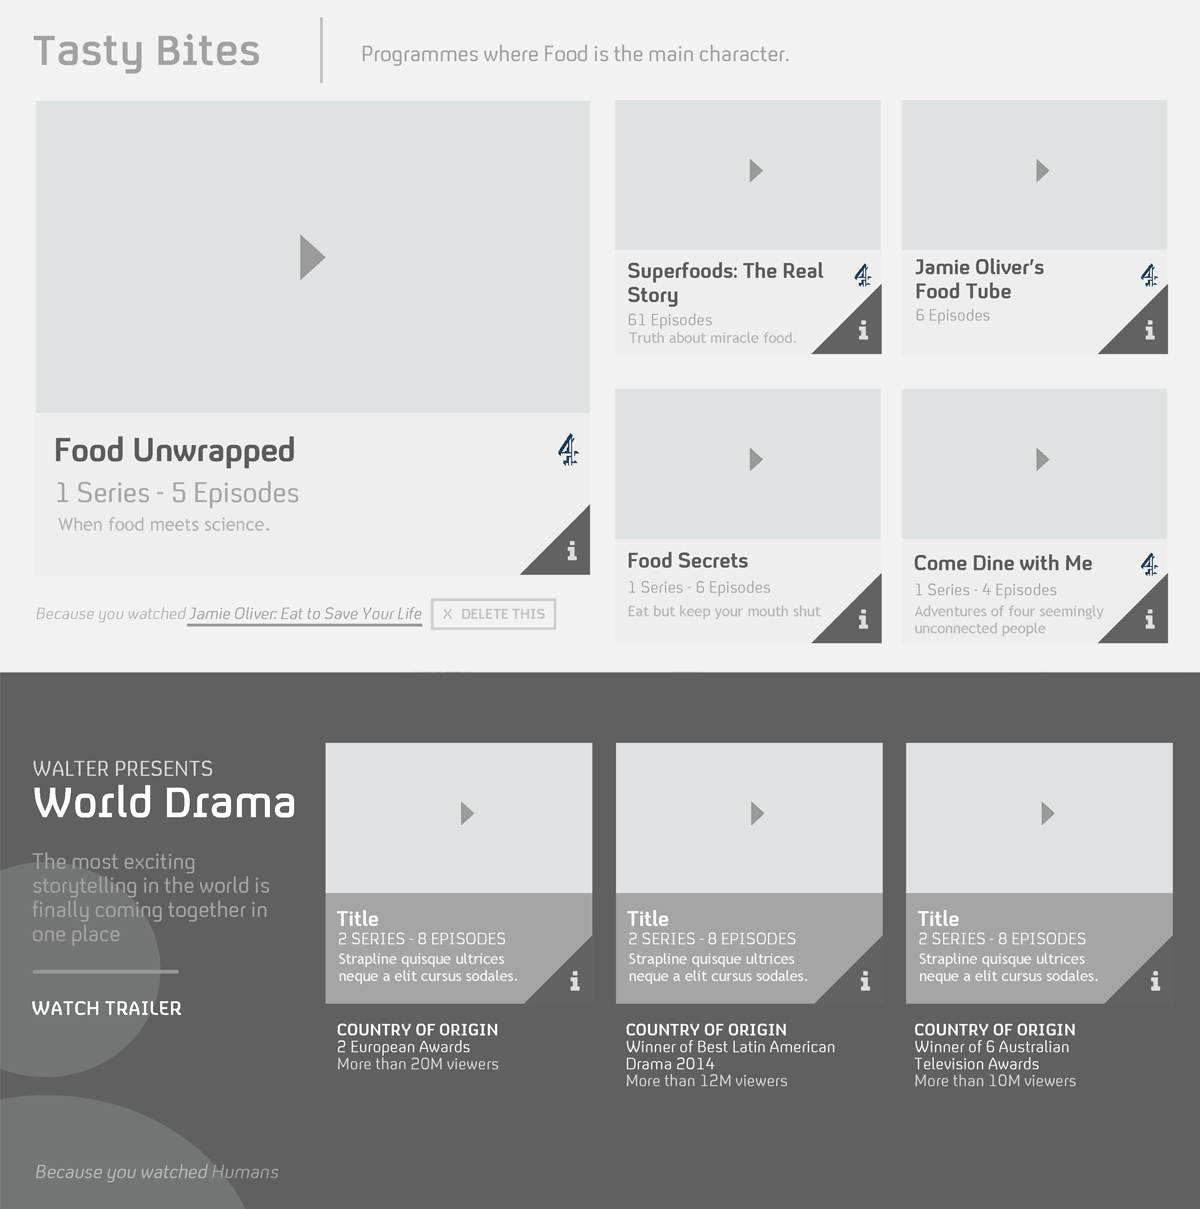 Examples of the designs made for this consultancy firm on desktop and mobile.